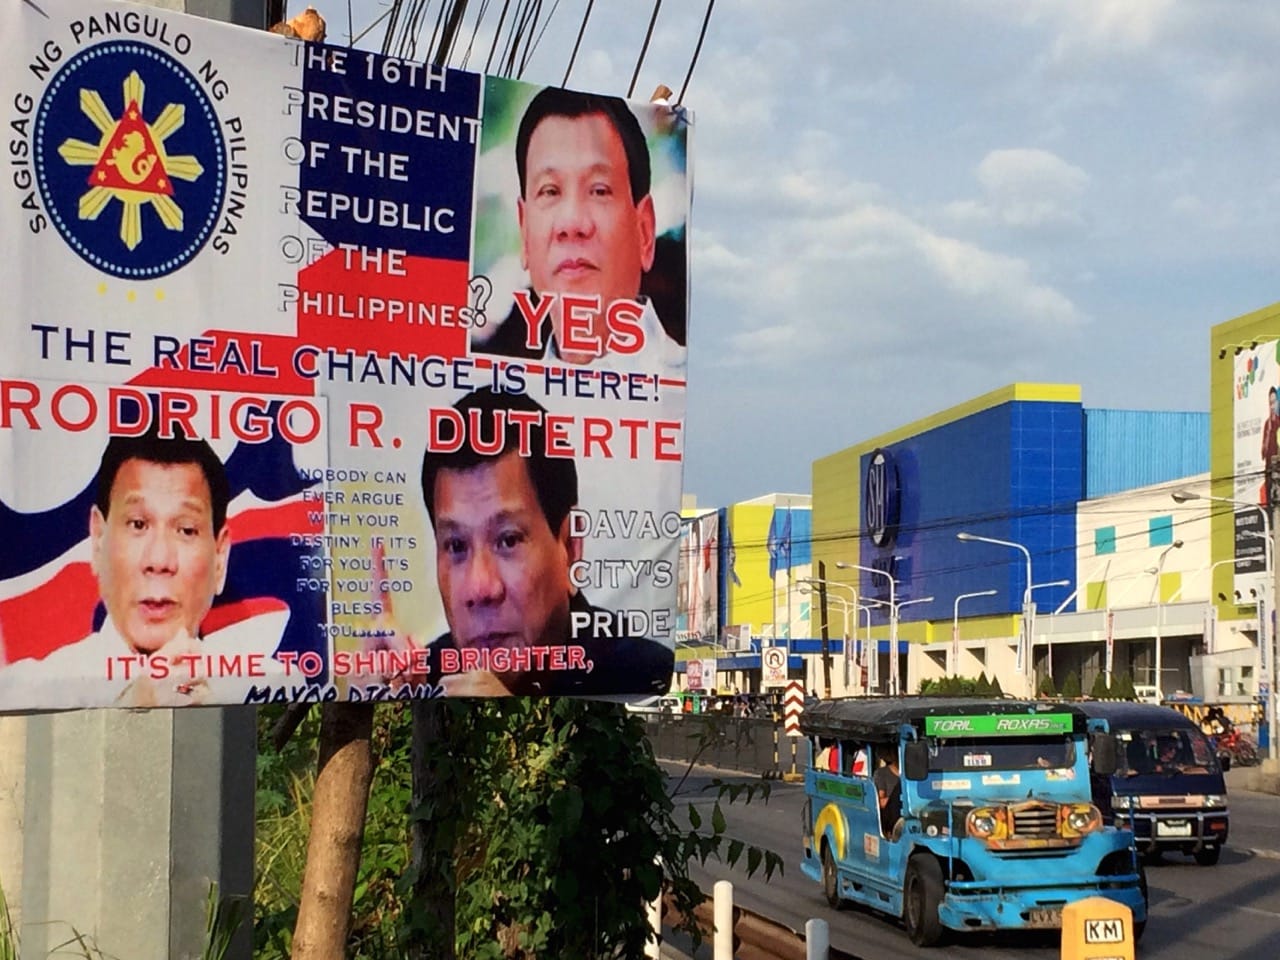 A jeepney drives past an election poster of Philippine presidential candidate Rodrigo Duterte in Davao city, 22 April 2016, REUTERS/Martin Petty